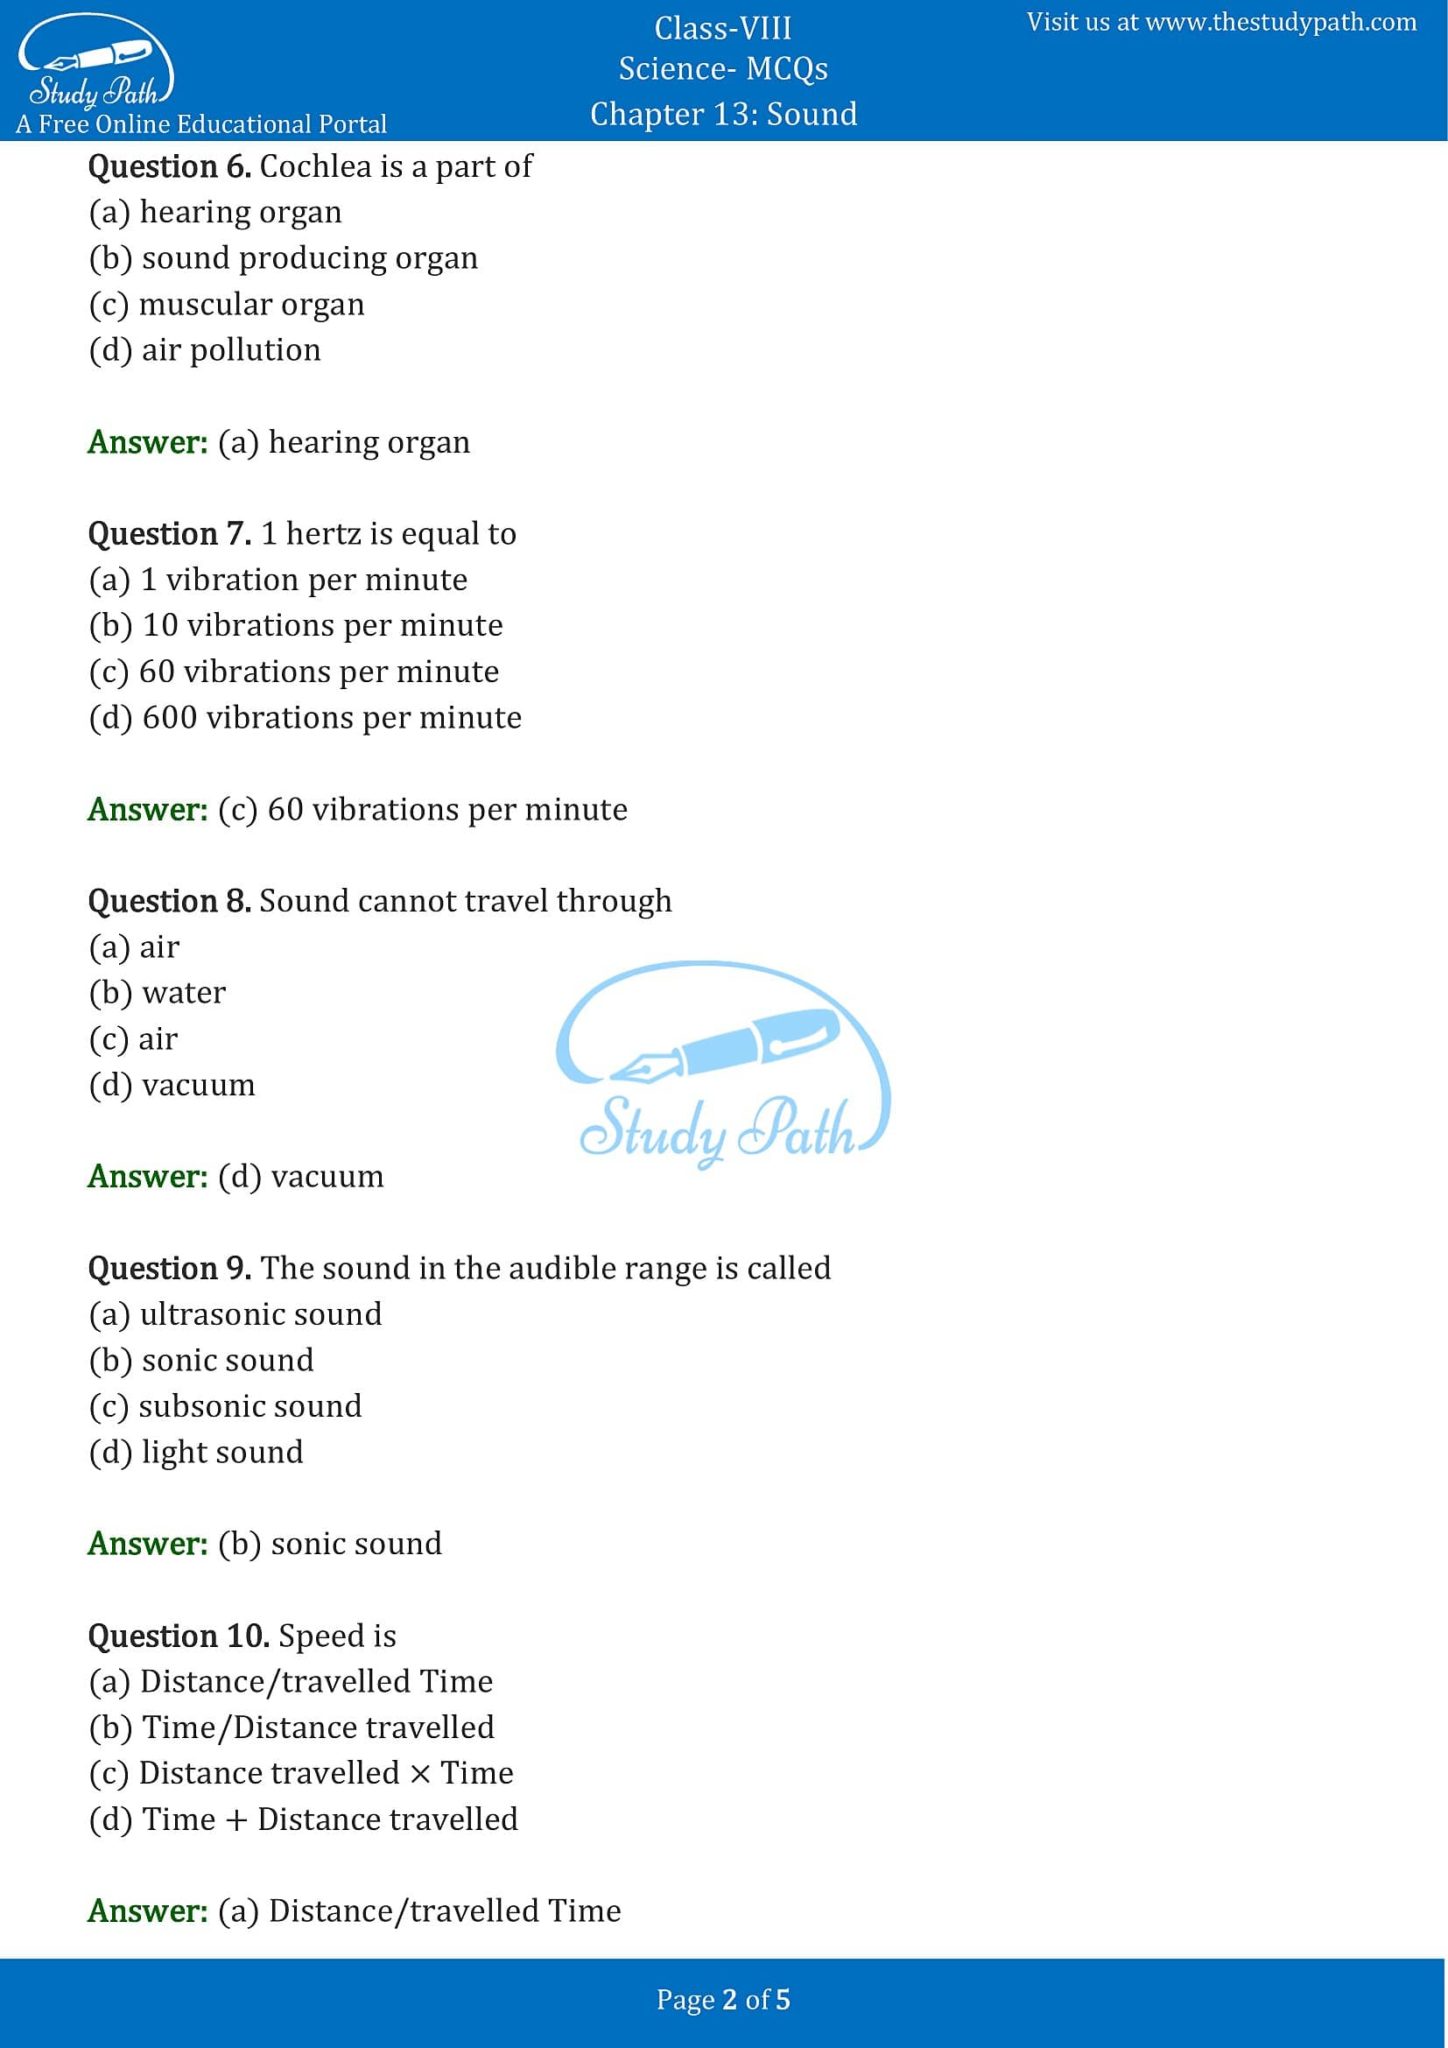 case study questions class 8 science sound